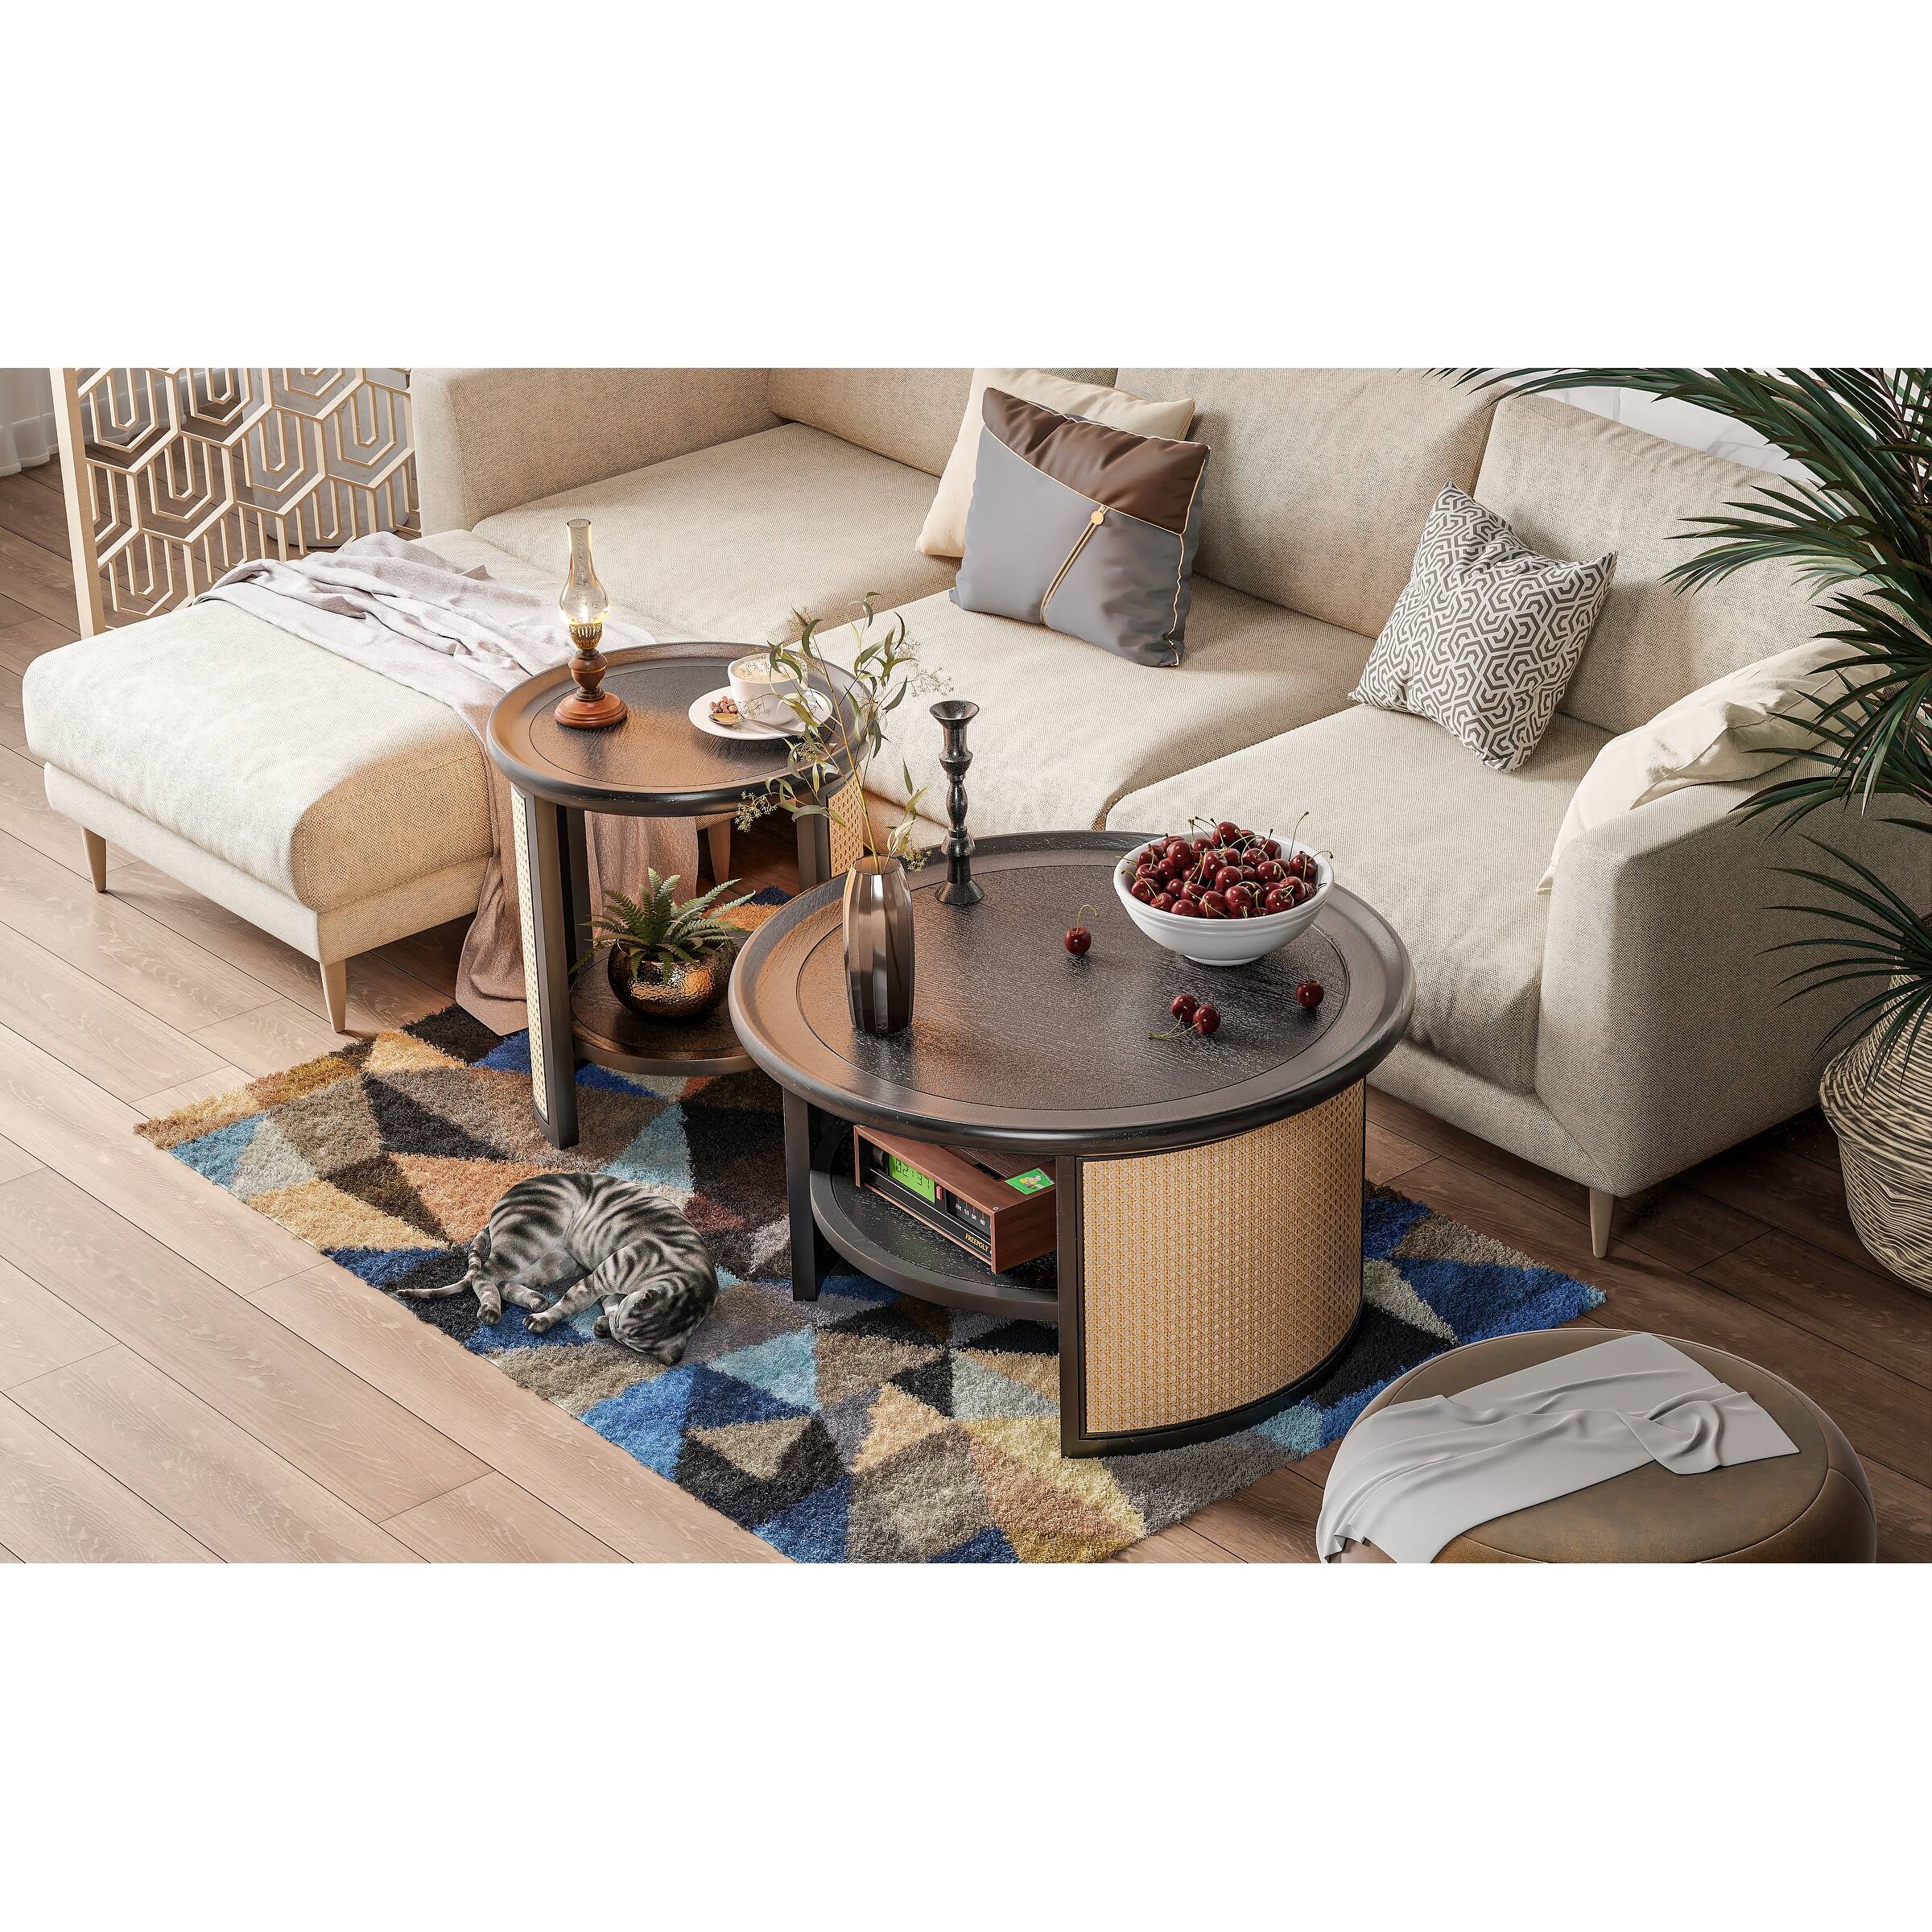 COZAYH Modern Farmhouse Round End Table with Storage Shelf, Wood Tray Top Coffee Table with Rattan Frame for Living Room